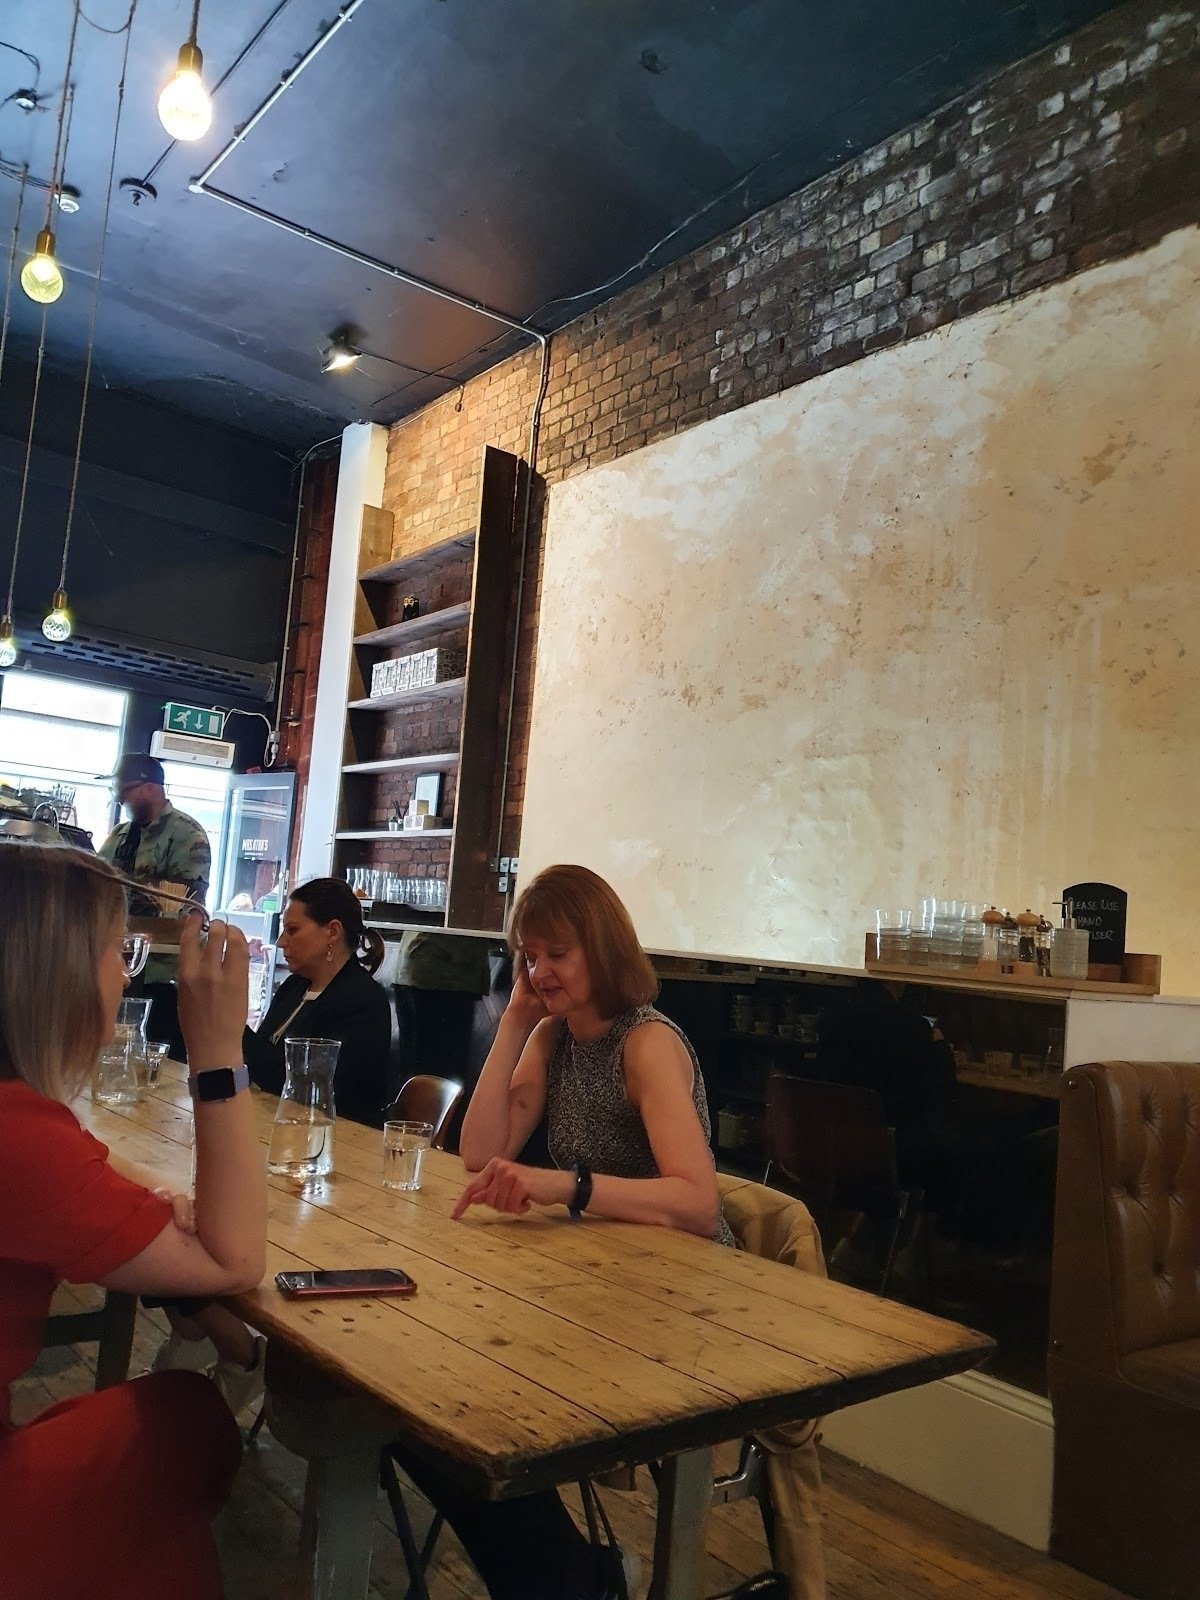 Mrs Atha's: A Work-Friendly Place in Leeds